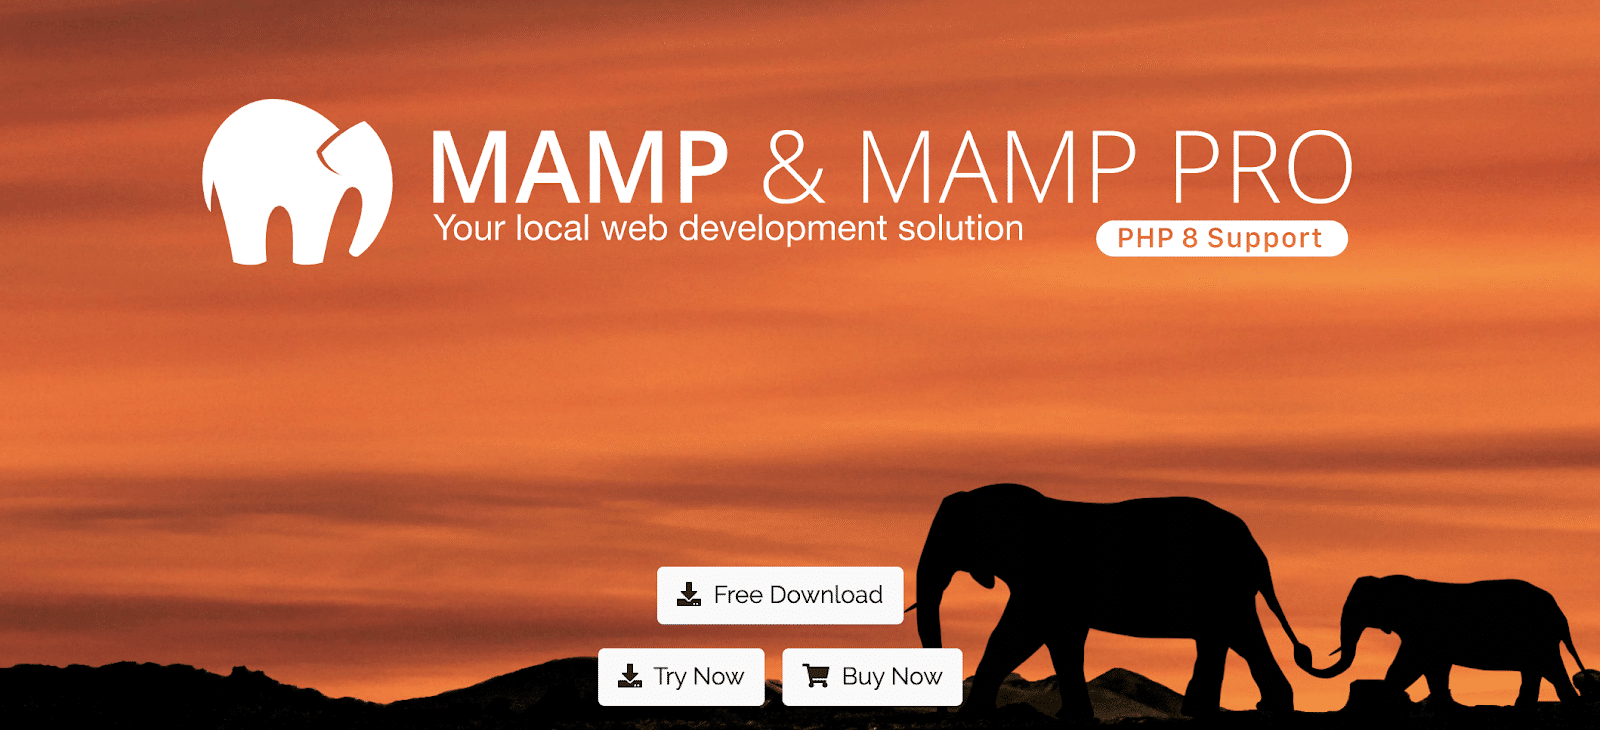 The MAMP home page.